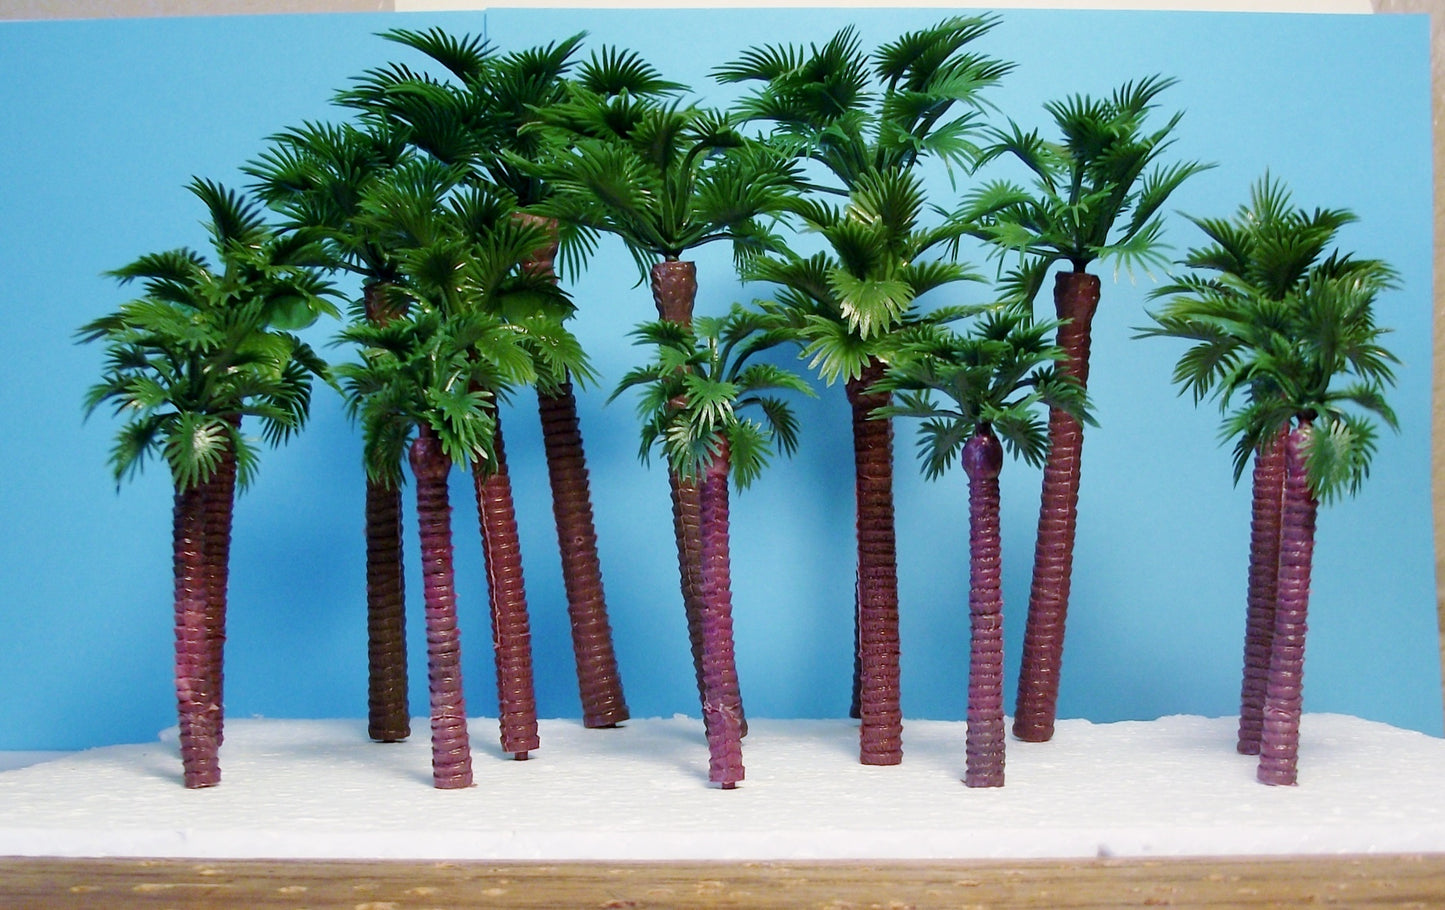 14 piece set of New Multi Gauge Use Model Palm Trees in 4 Sizes from 3 1/8" to 6"